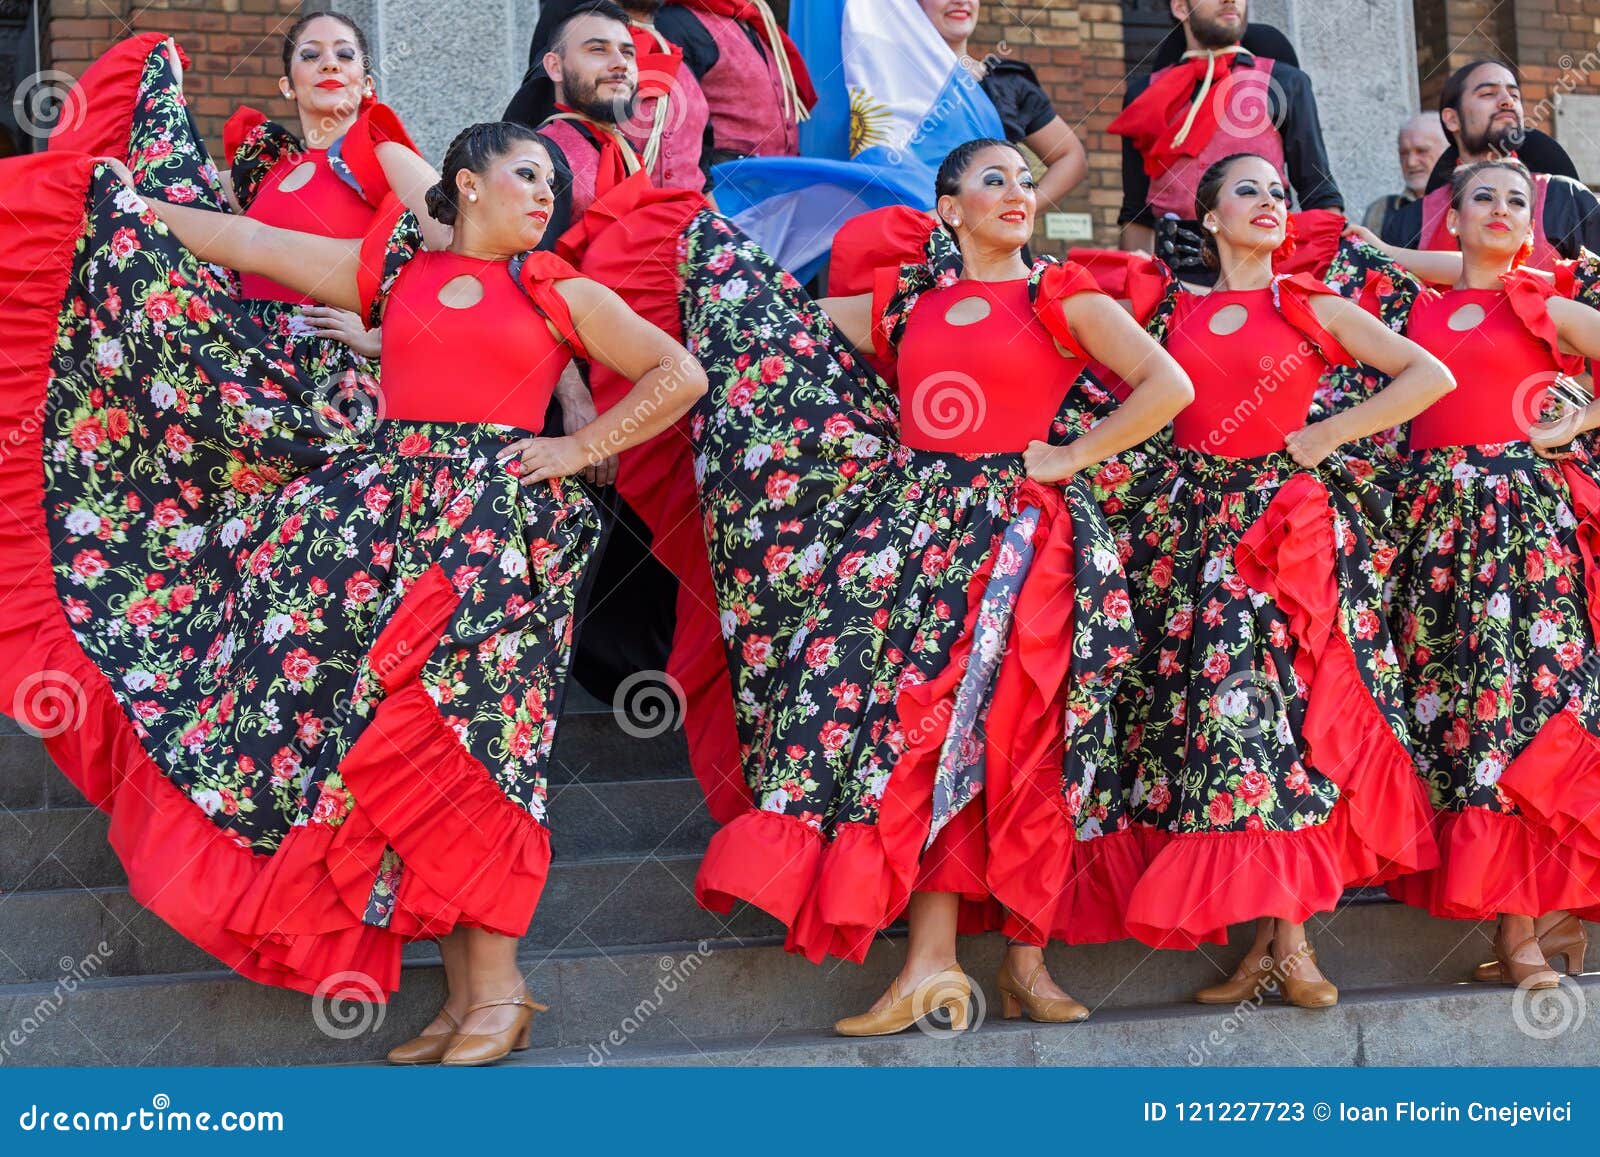 Argentina Traditional Clothing